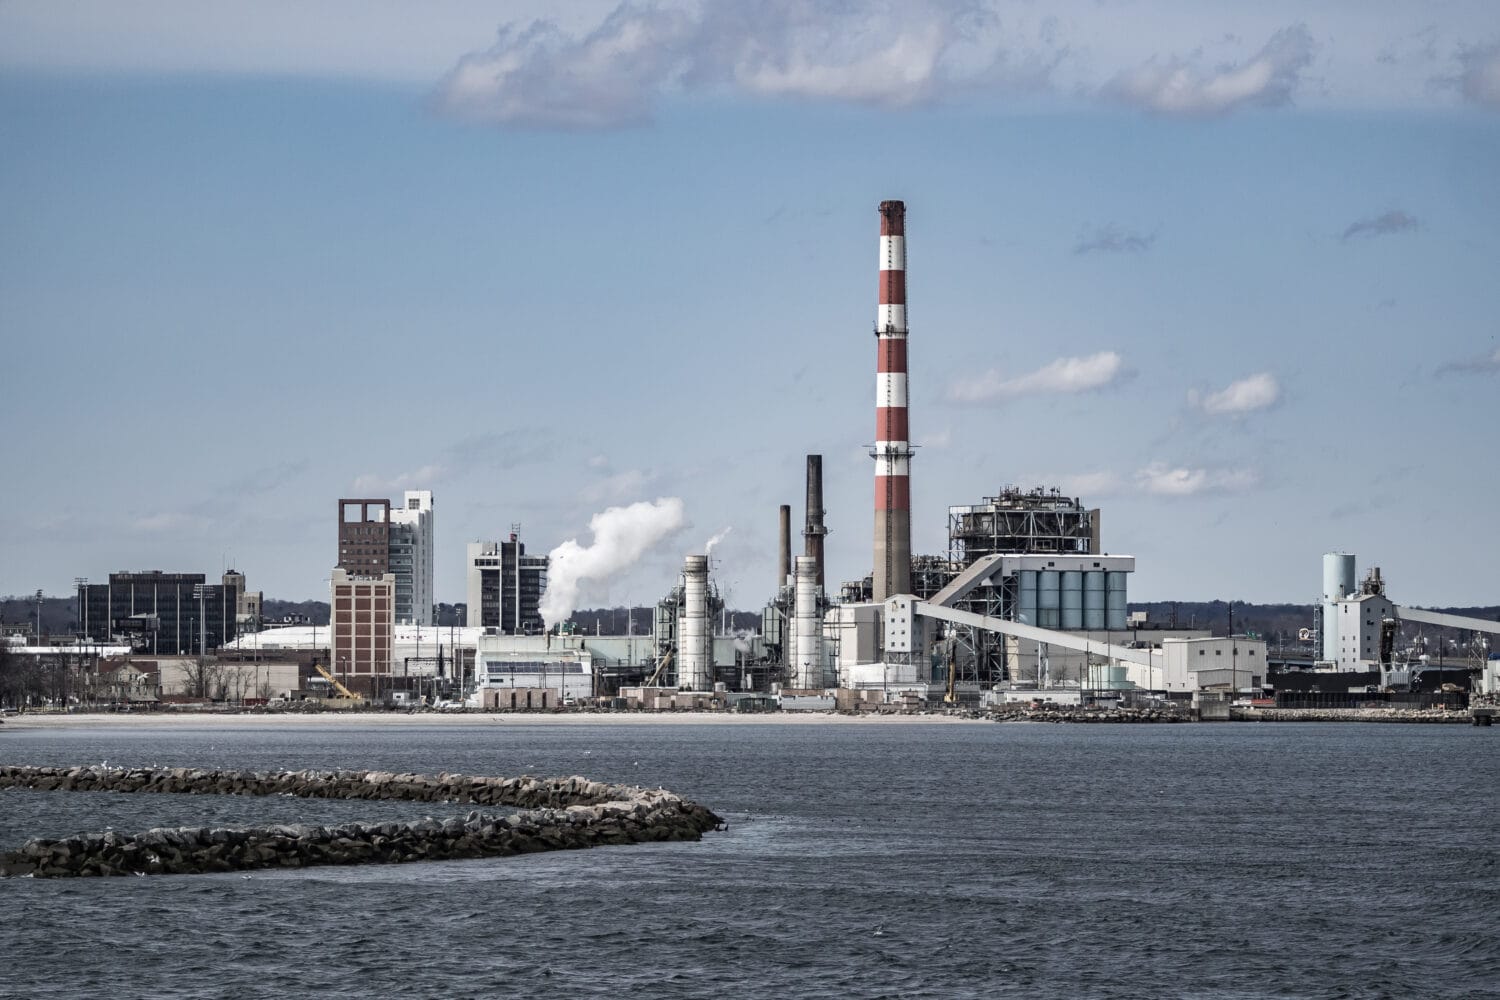 Industrial complex on Tongue Point in Bridgeport, CT, USA.